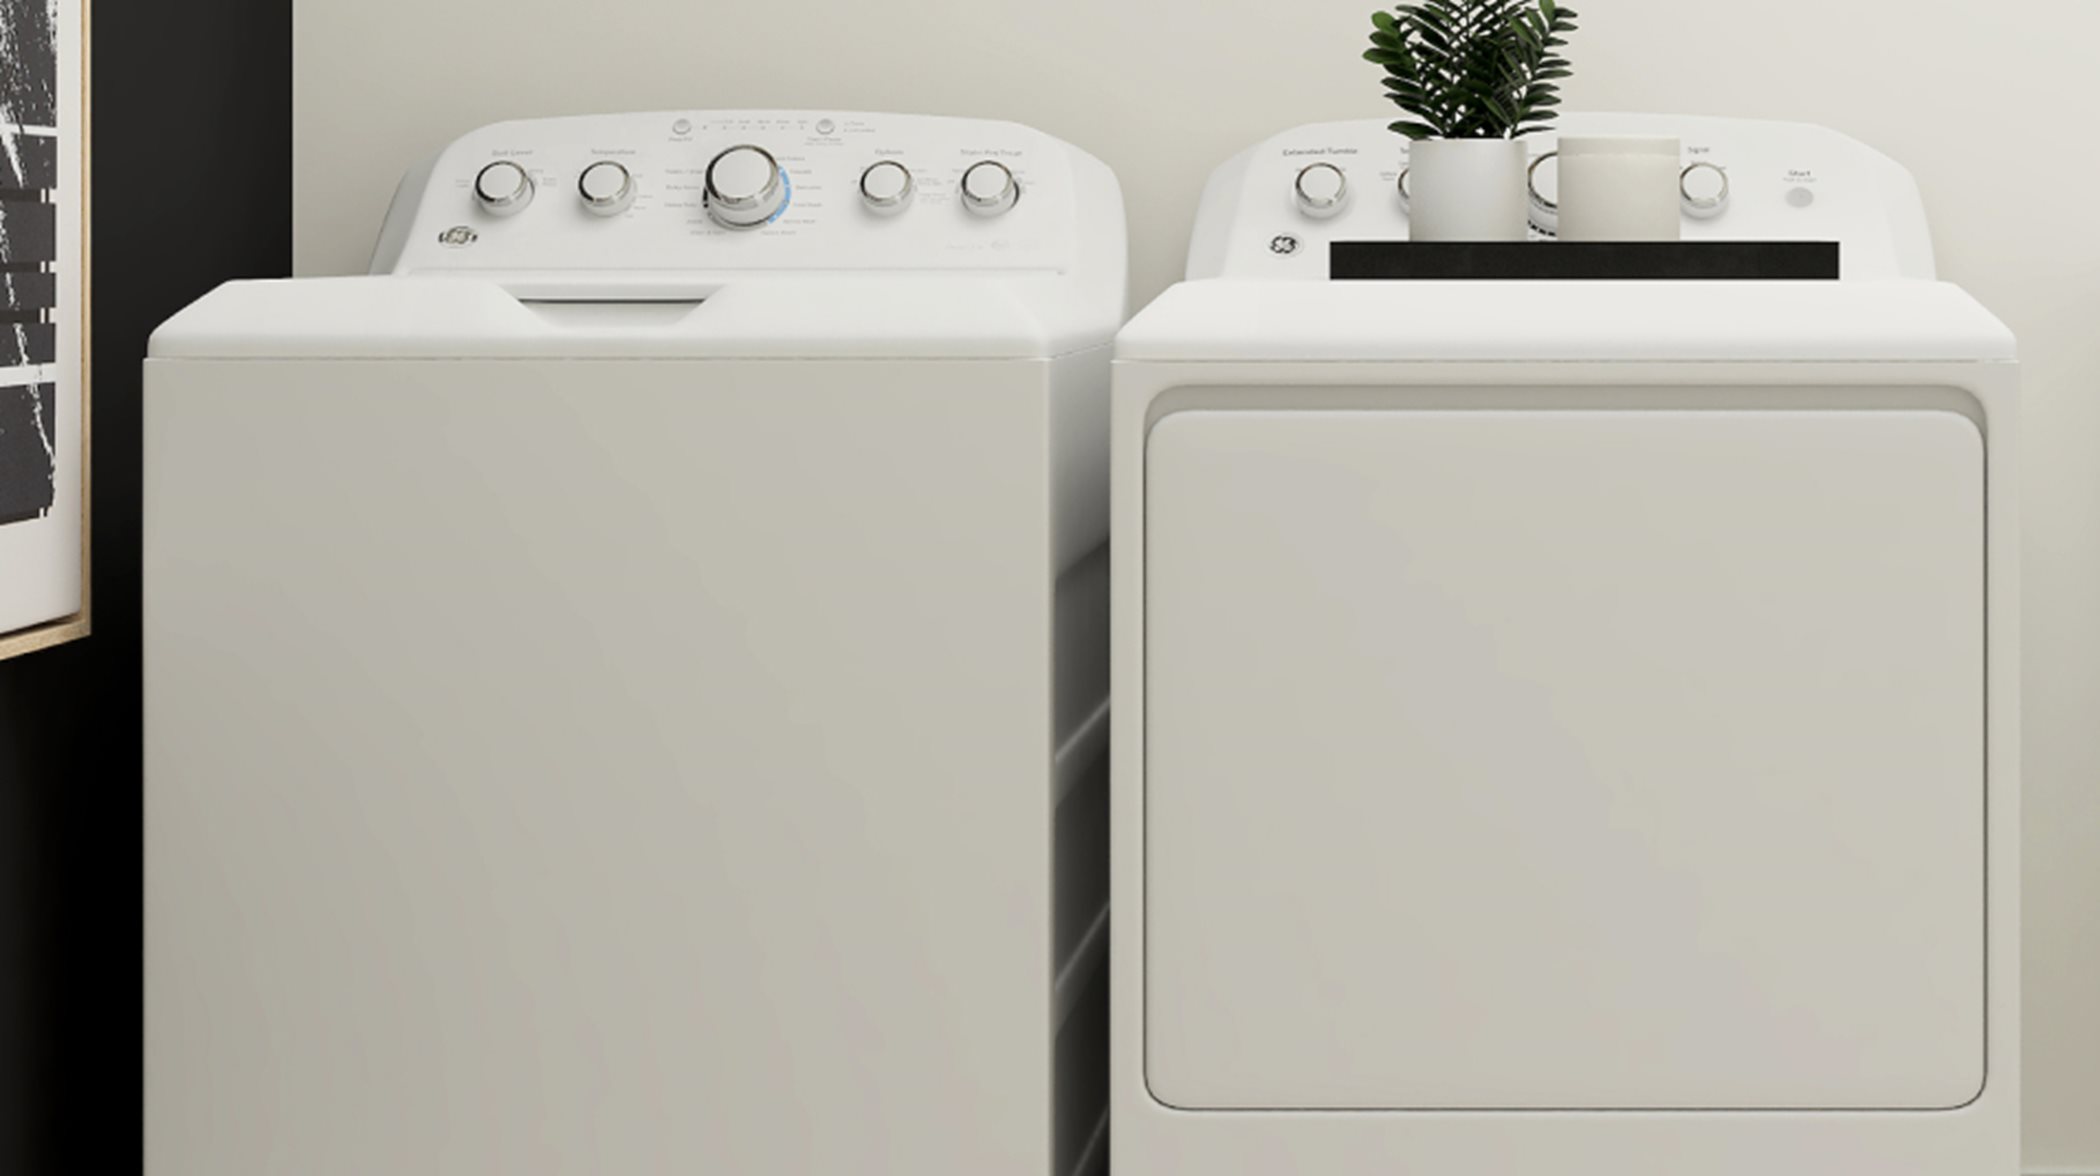 Triple Creek Executives washer and dryer